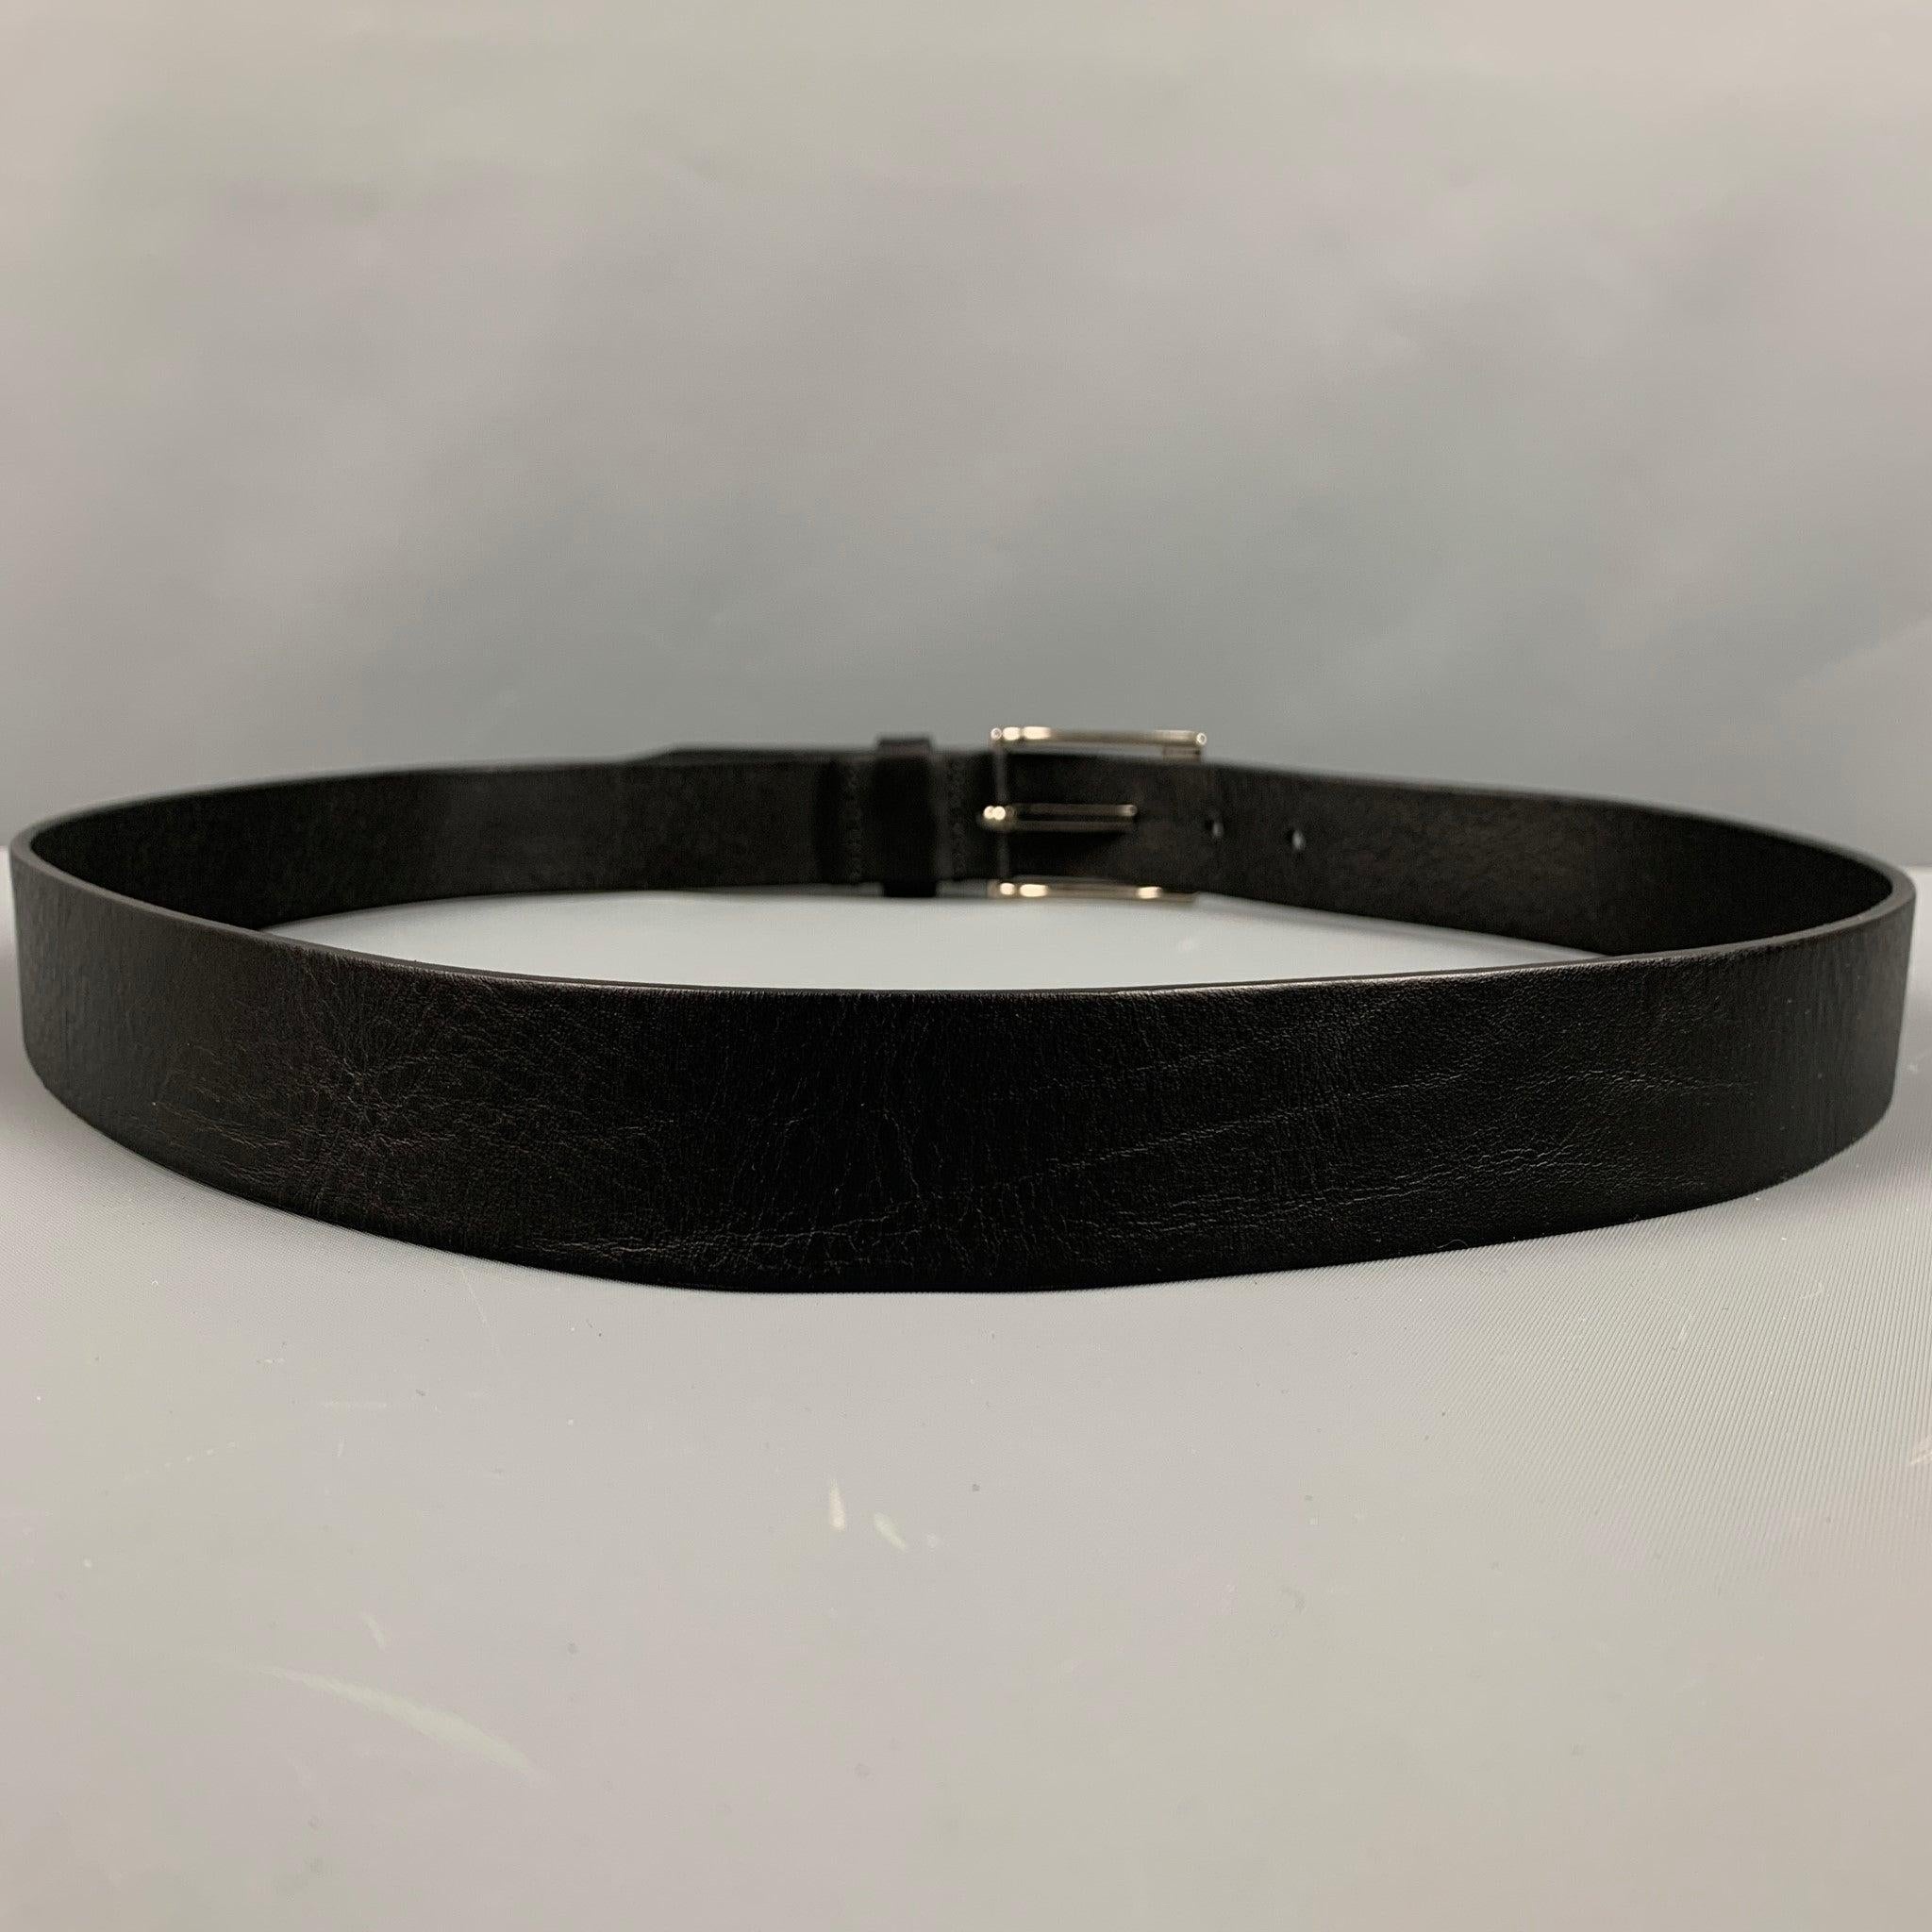 TOMMY HILFIGER Size 38 Black Leather Belt In Excellent Condition For Sale In San Francisco, CA